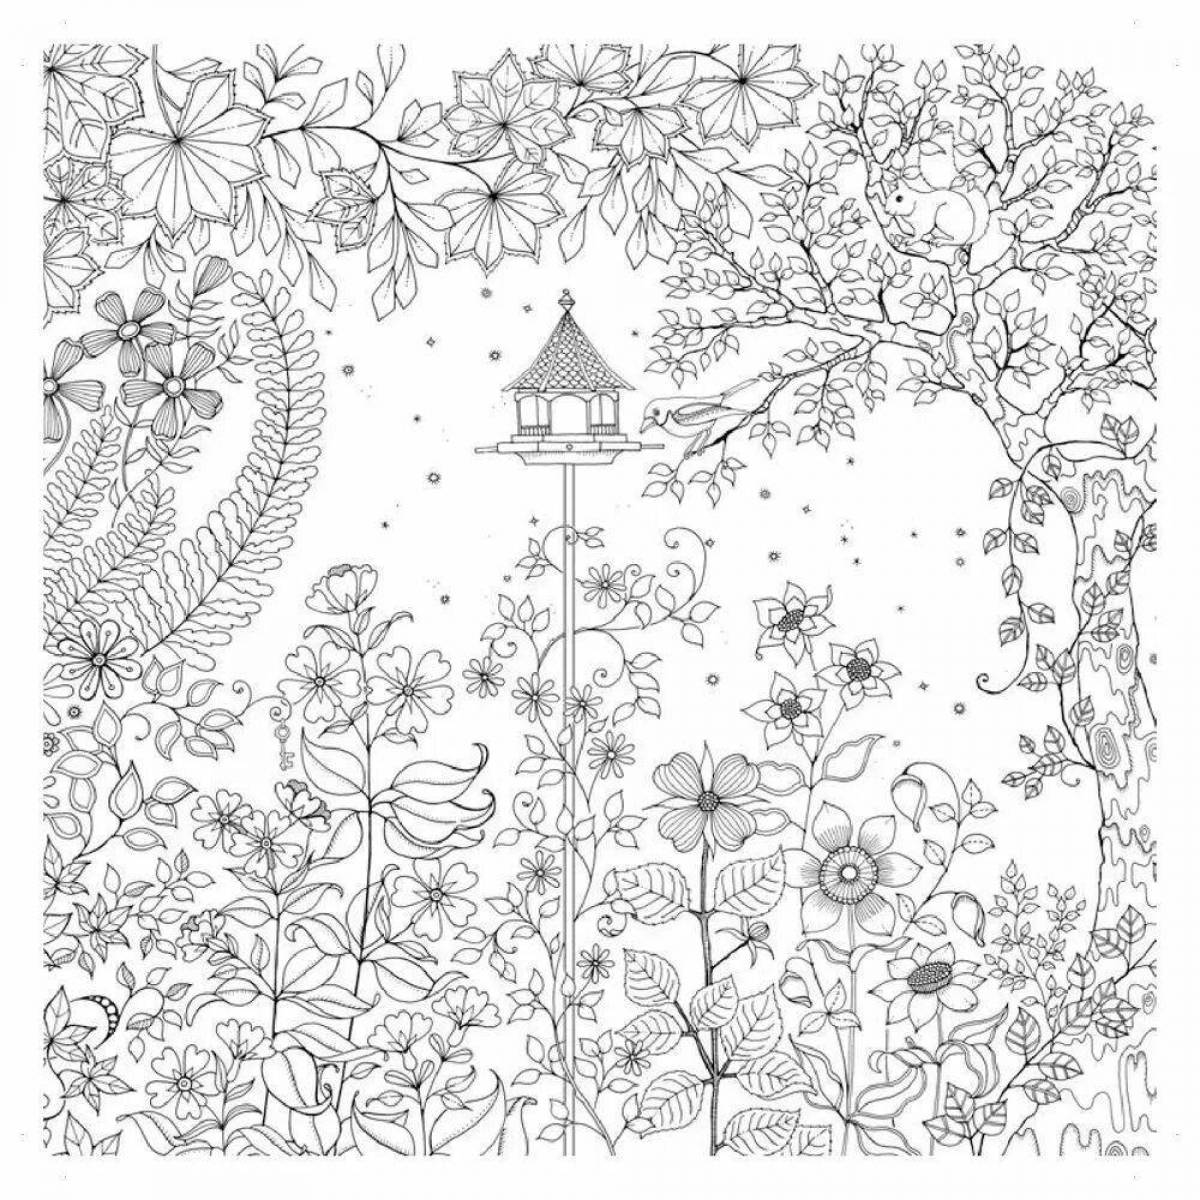 Charming coloring book antistress mysterious forest